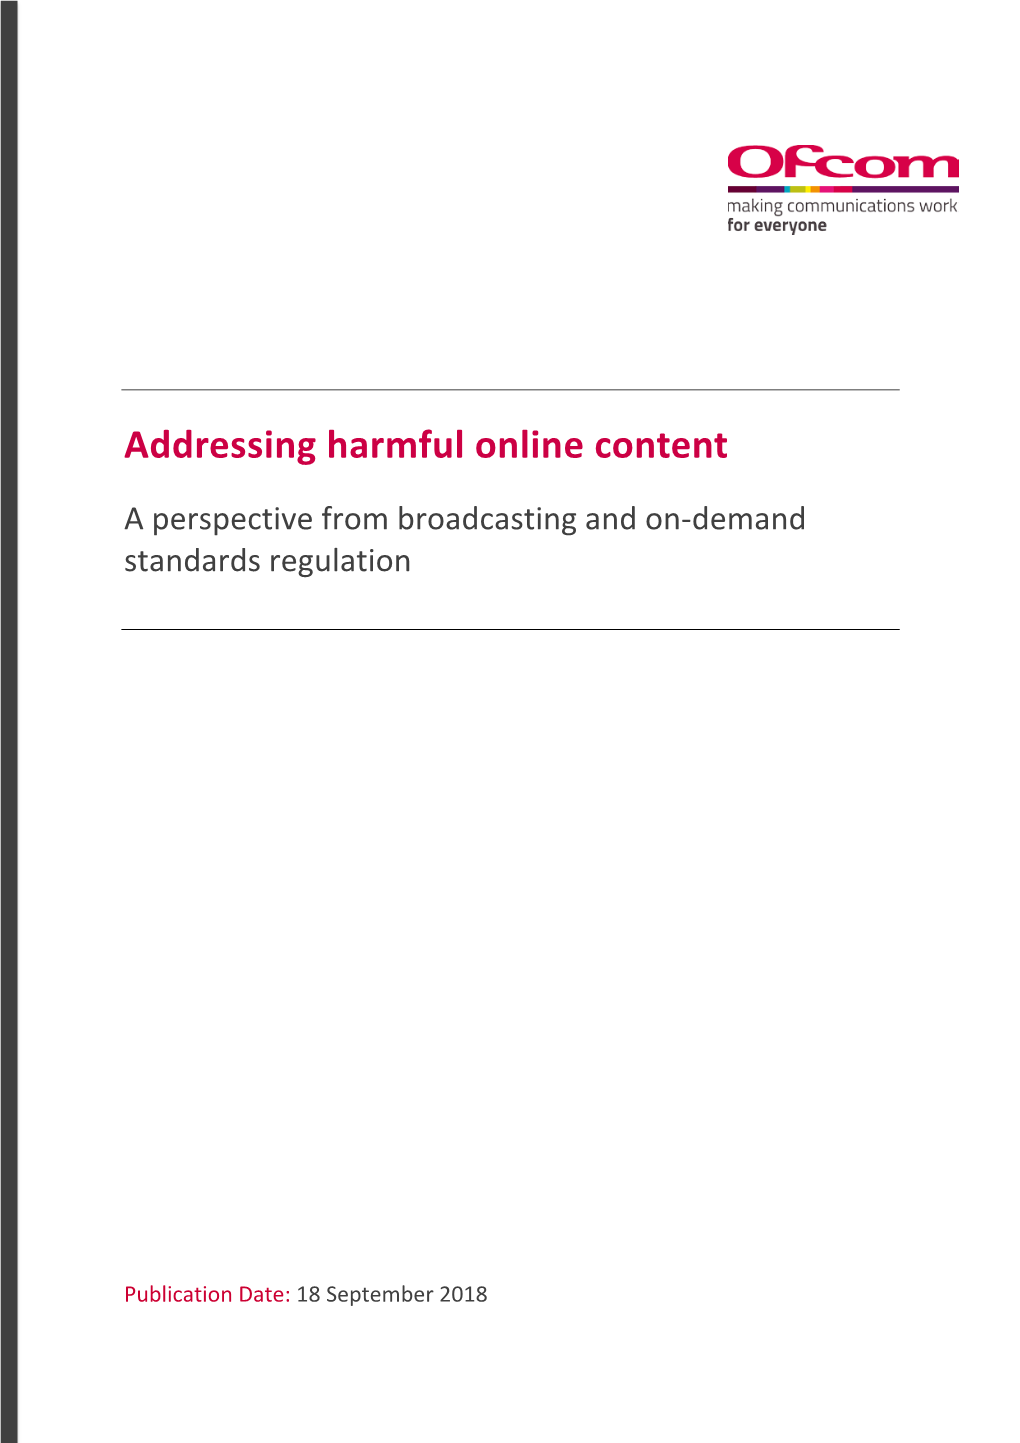 Addressing Harmful Online Content: a Perspective From